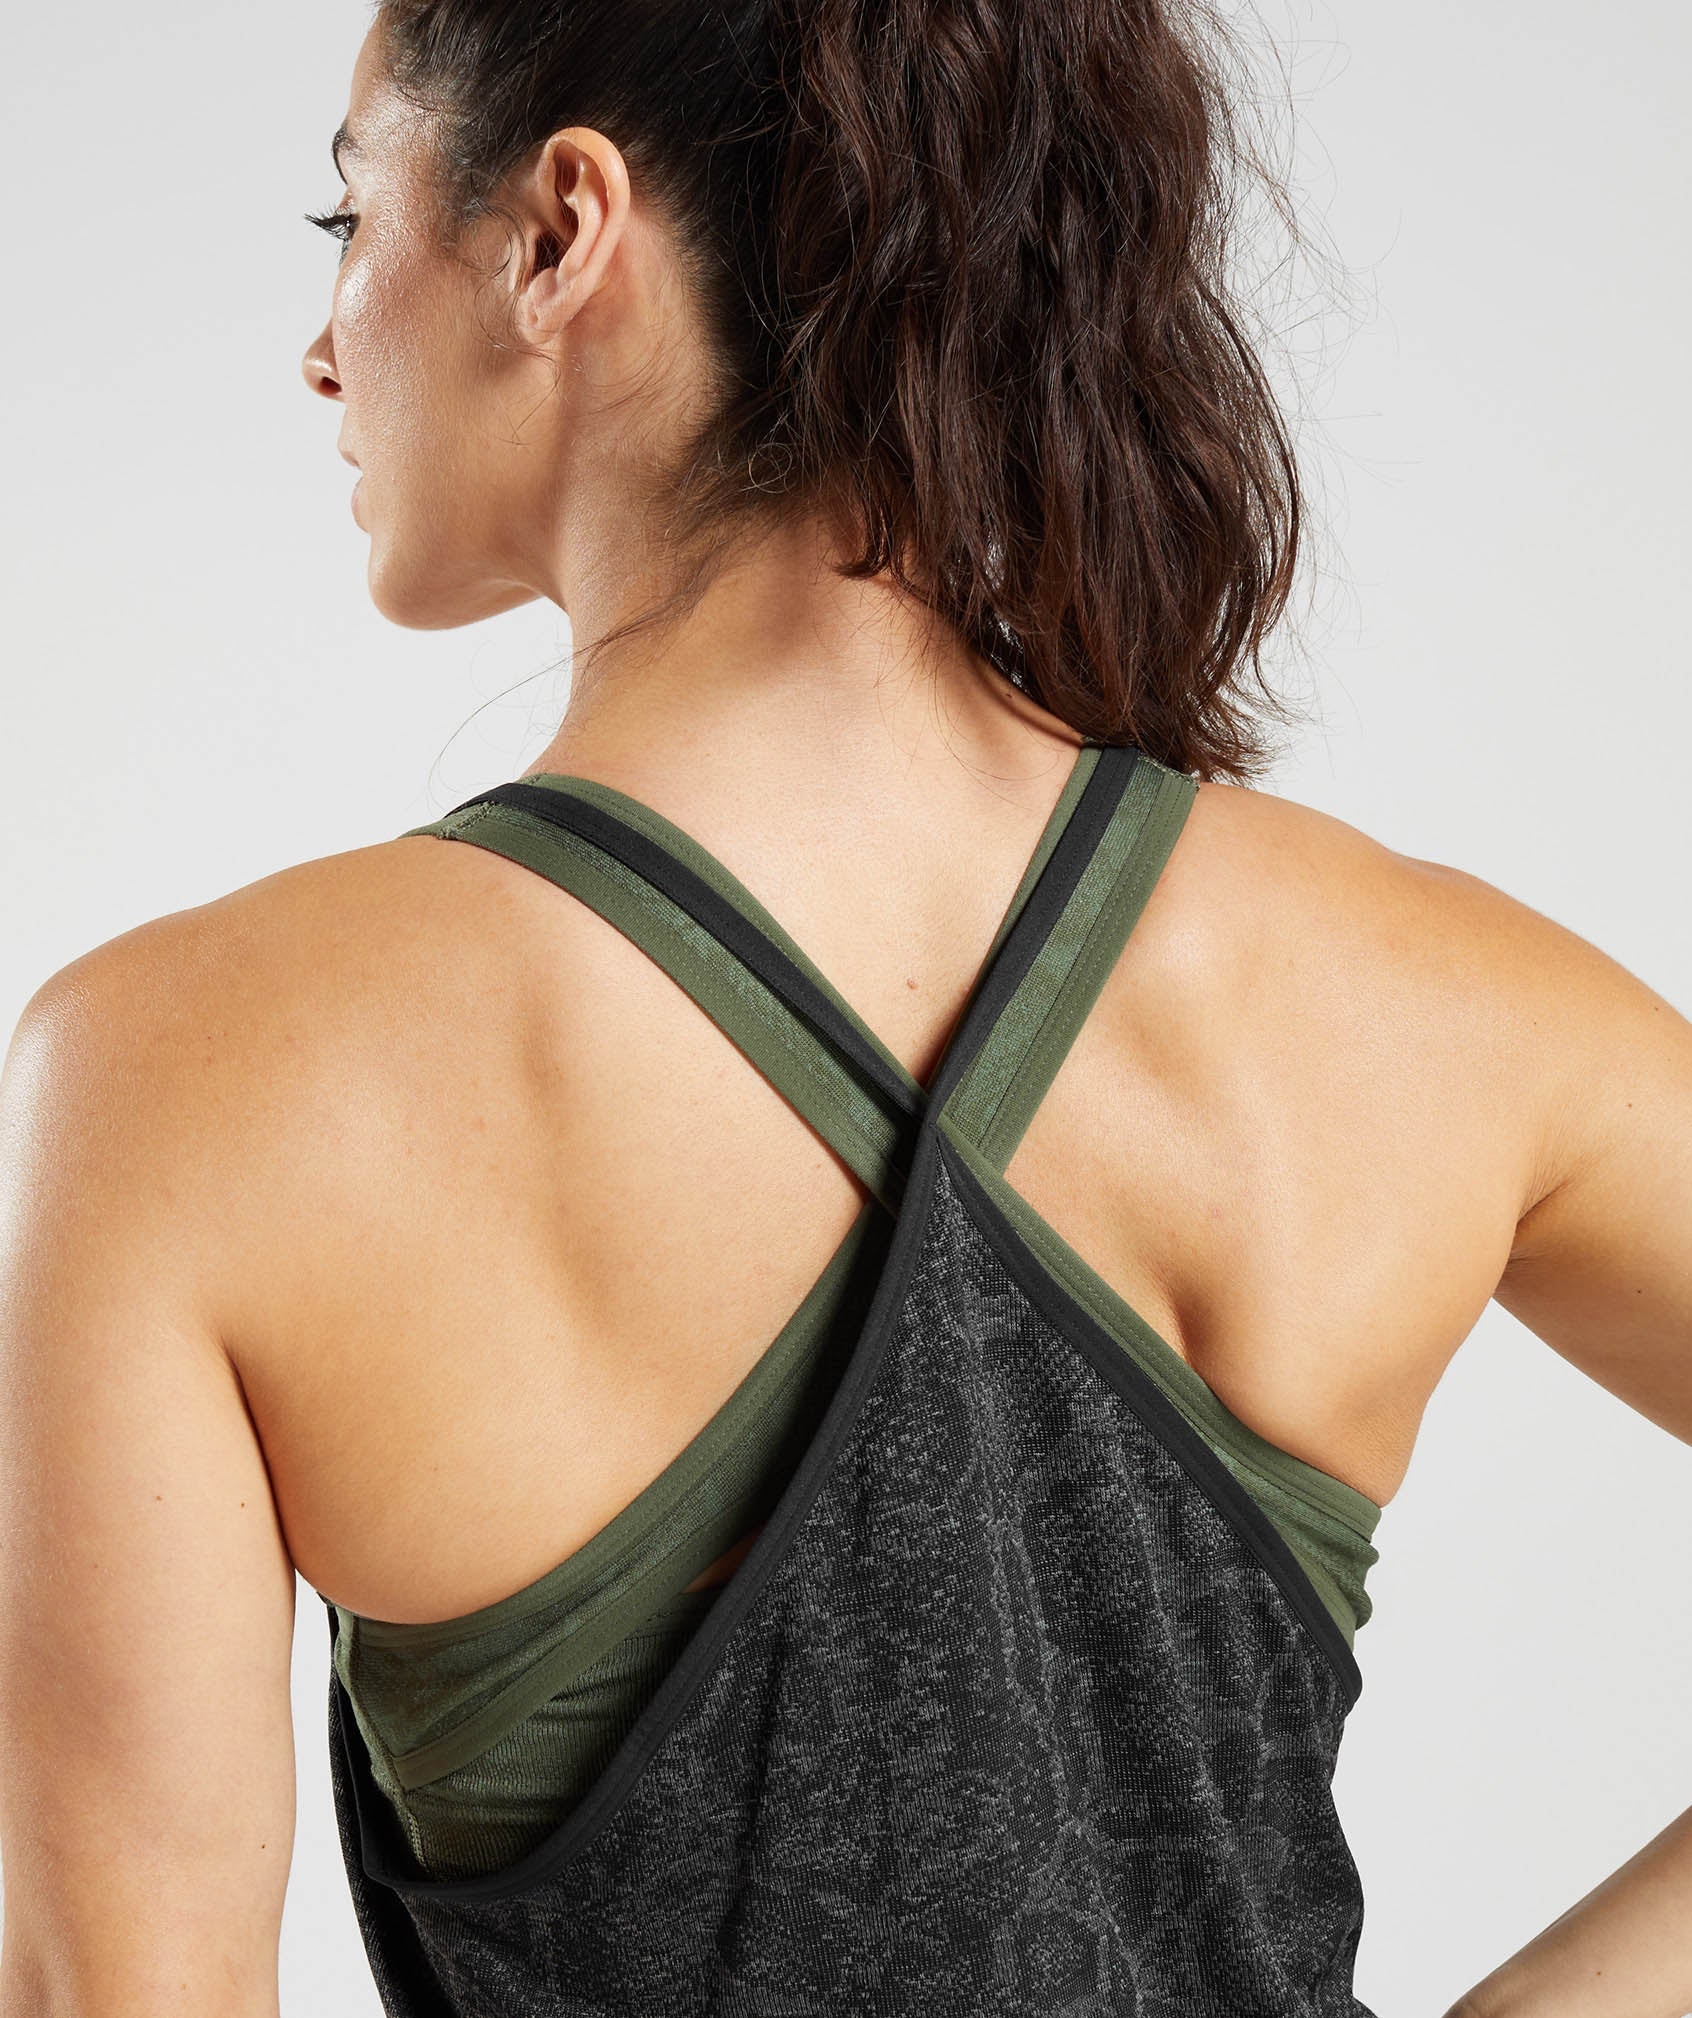 Womens Gymshark Fit Seamless Loose Activewear Tank Top Vest Green  Breathable